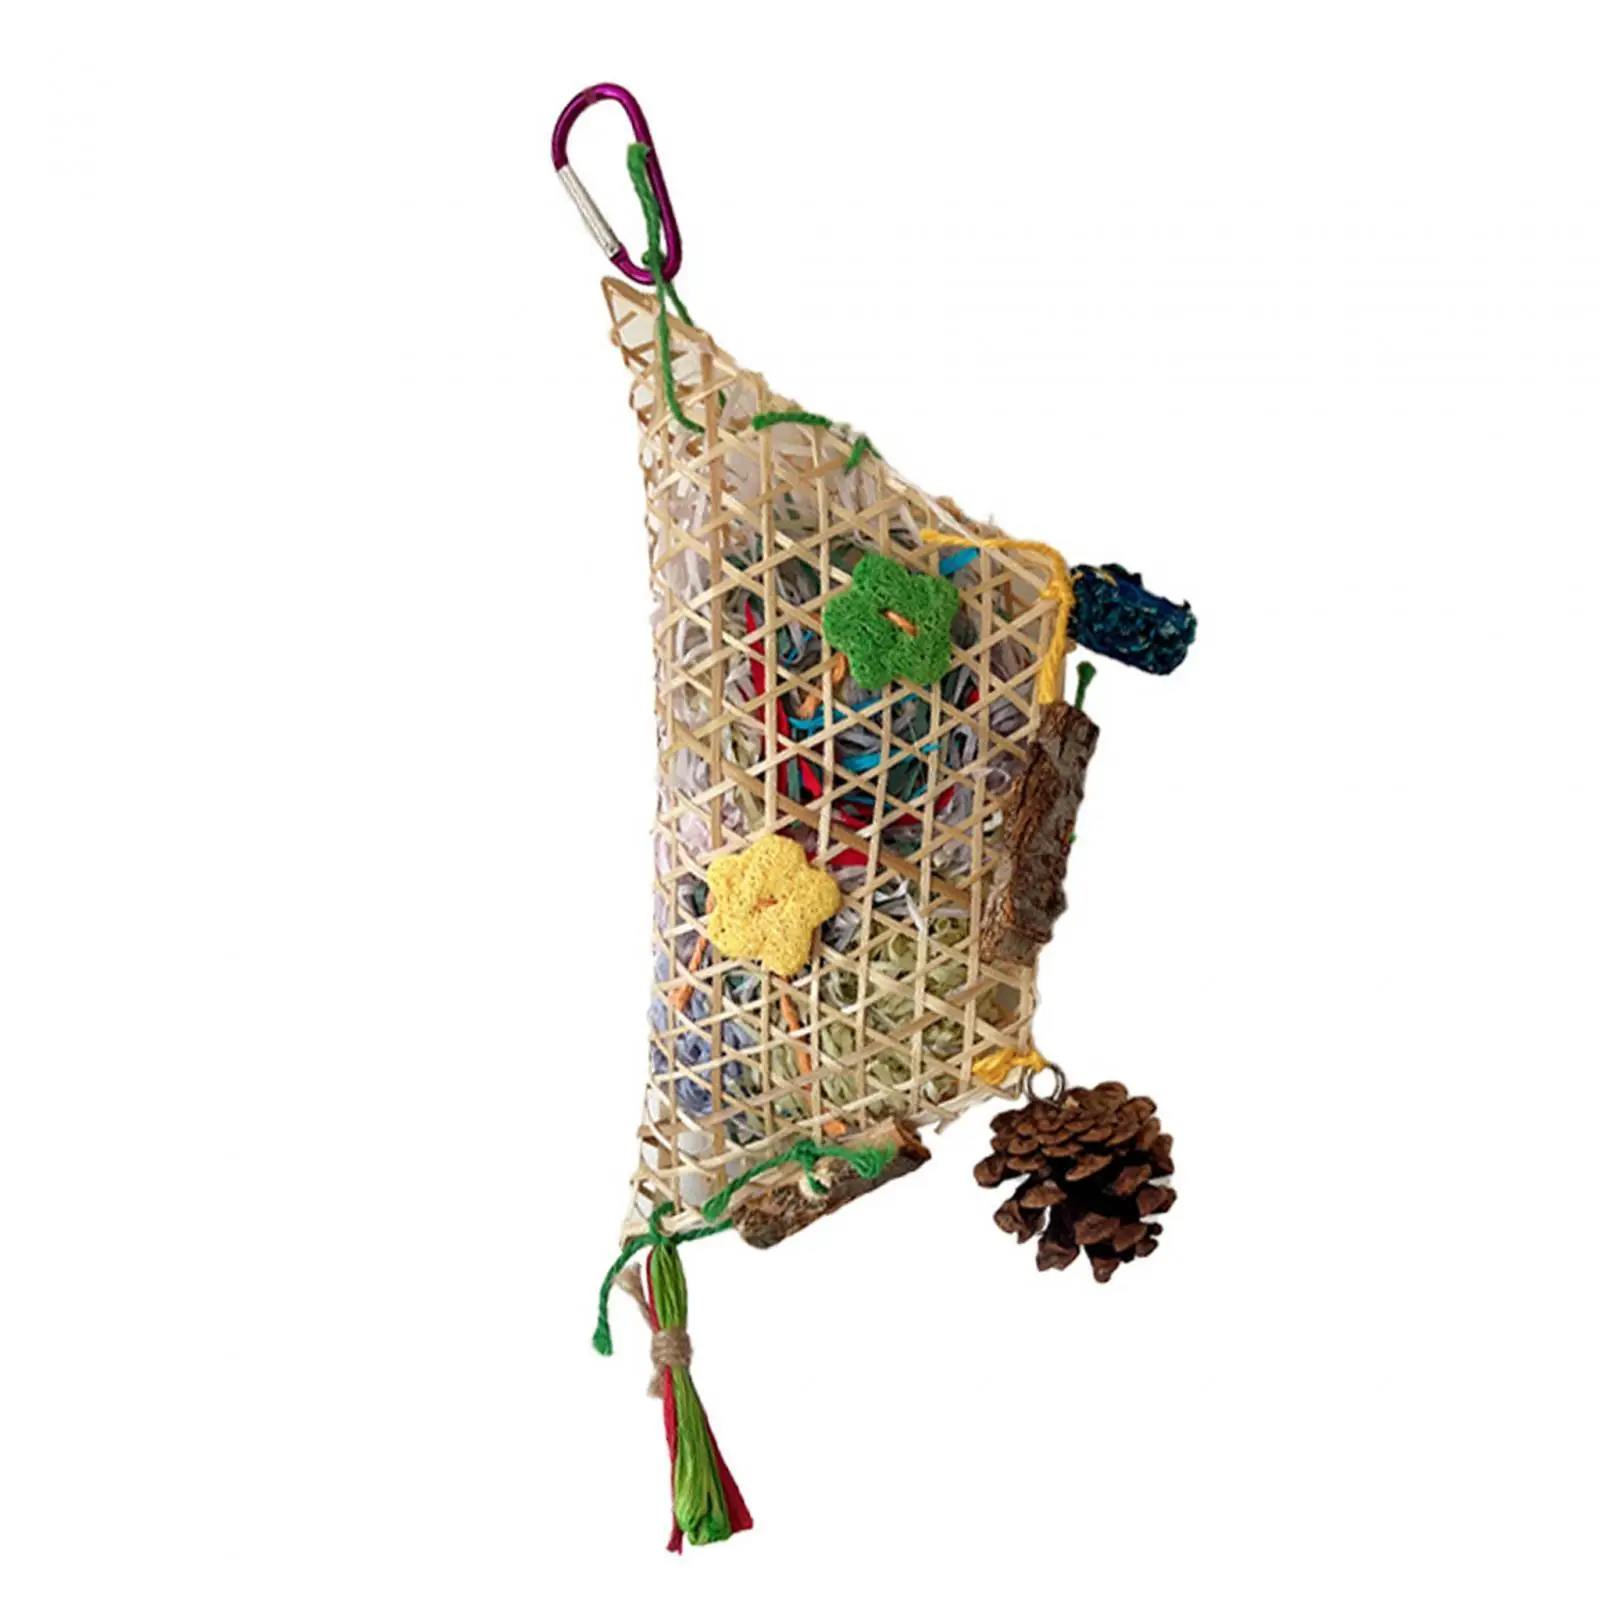 Parrot Chew Toy Bird Chewing Toy Parrot Cage Shredder Toy Bird Chew Toy for Finches Small Medium Birds Lovebirds Parrot Macaws